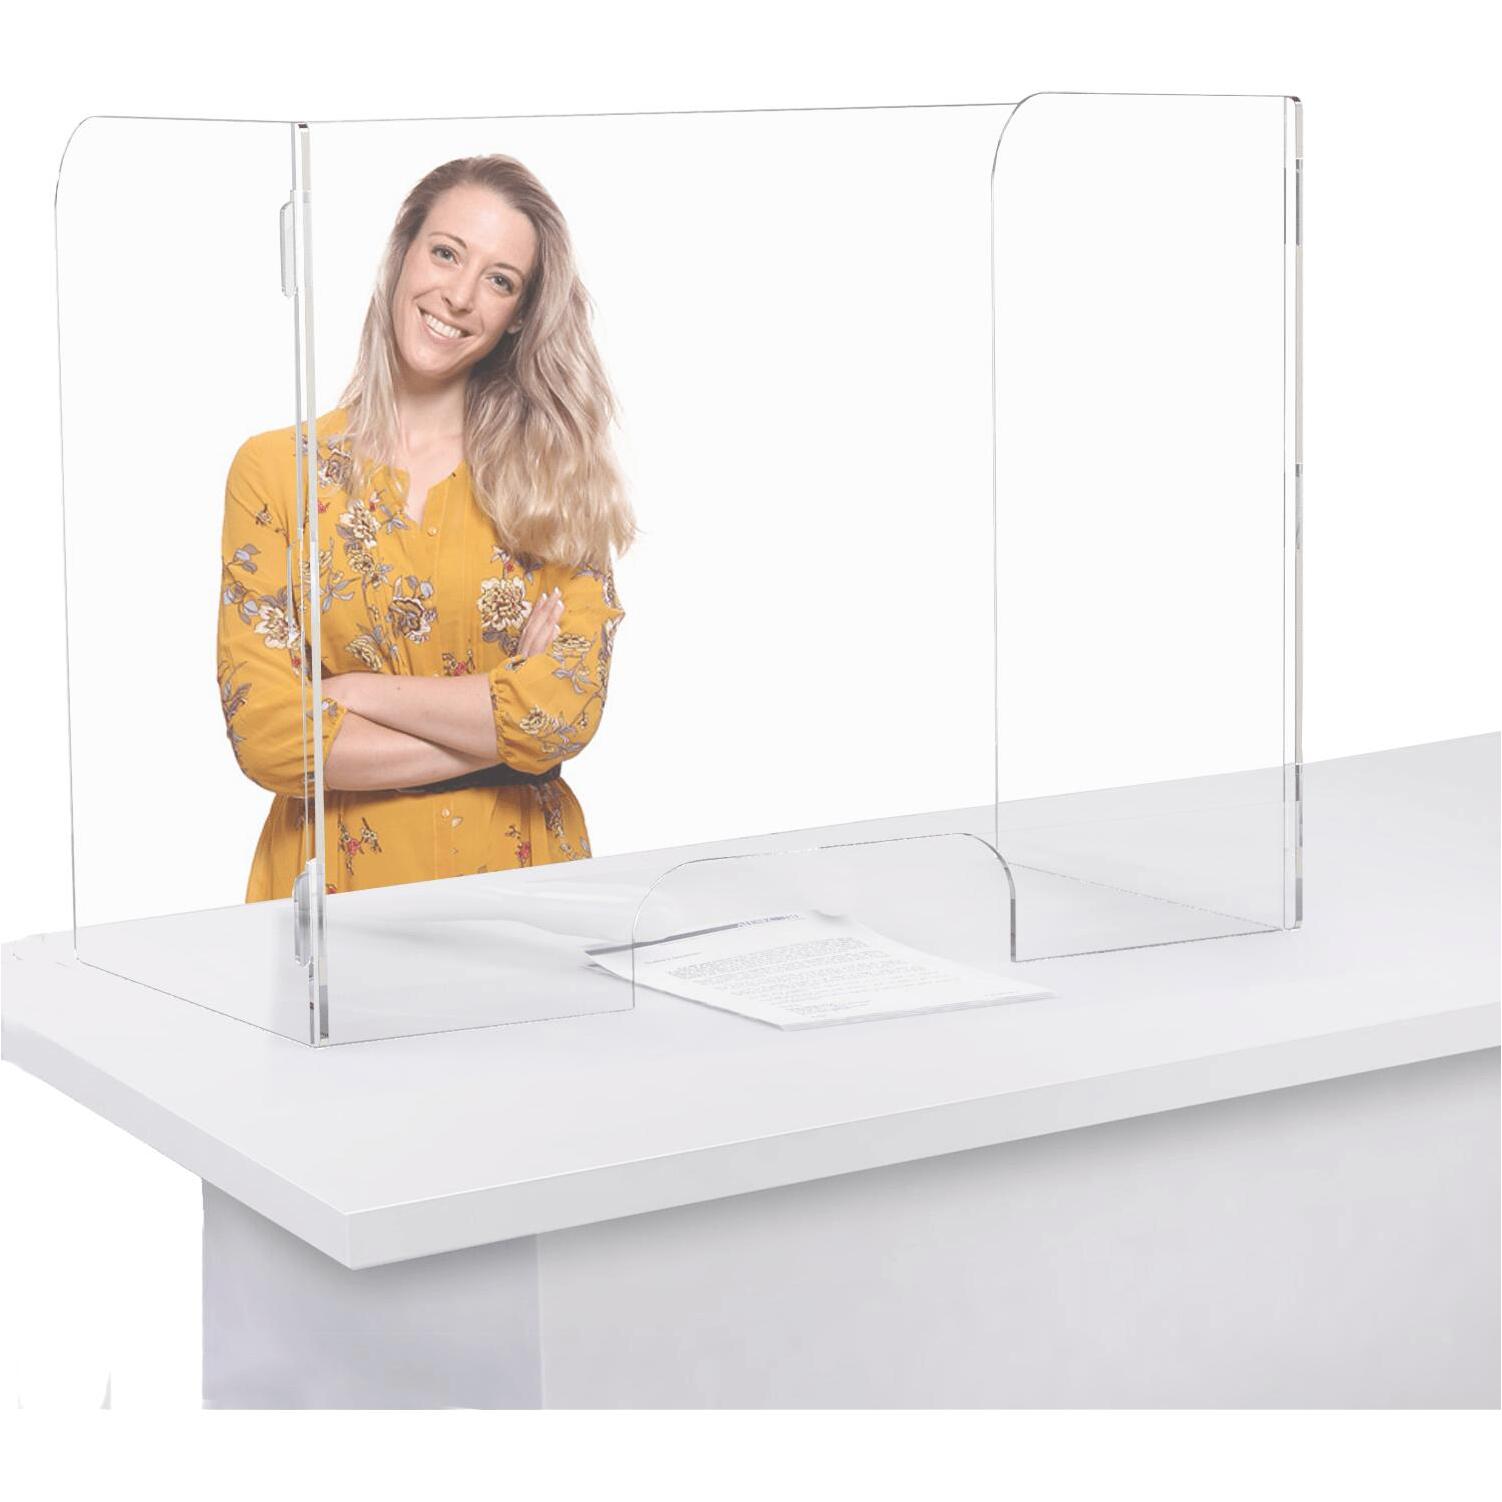 Clear acrylic desk table countertops divider screen stand of sneeze guard cough shields